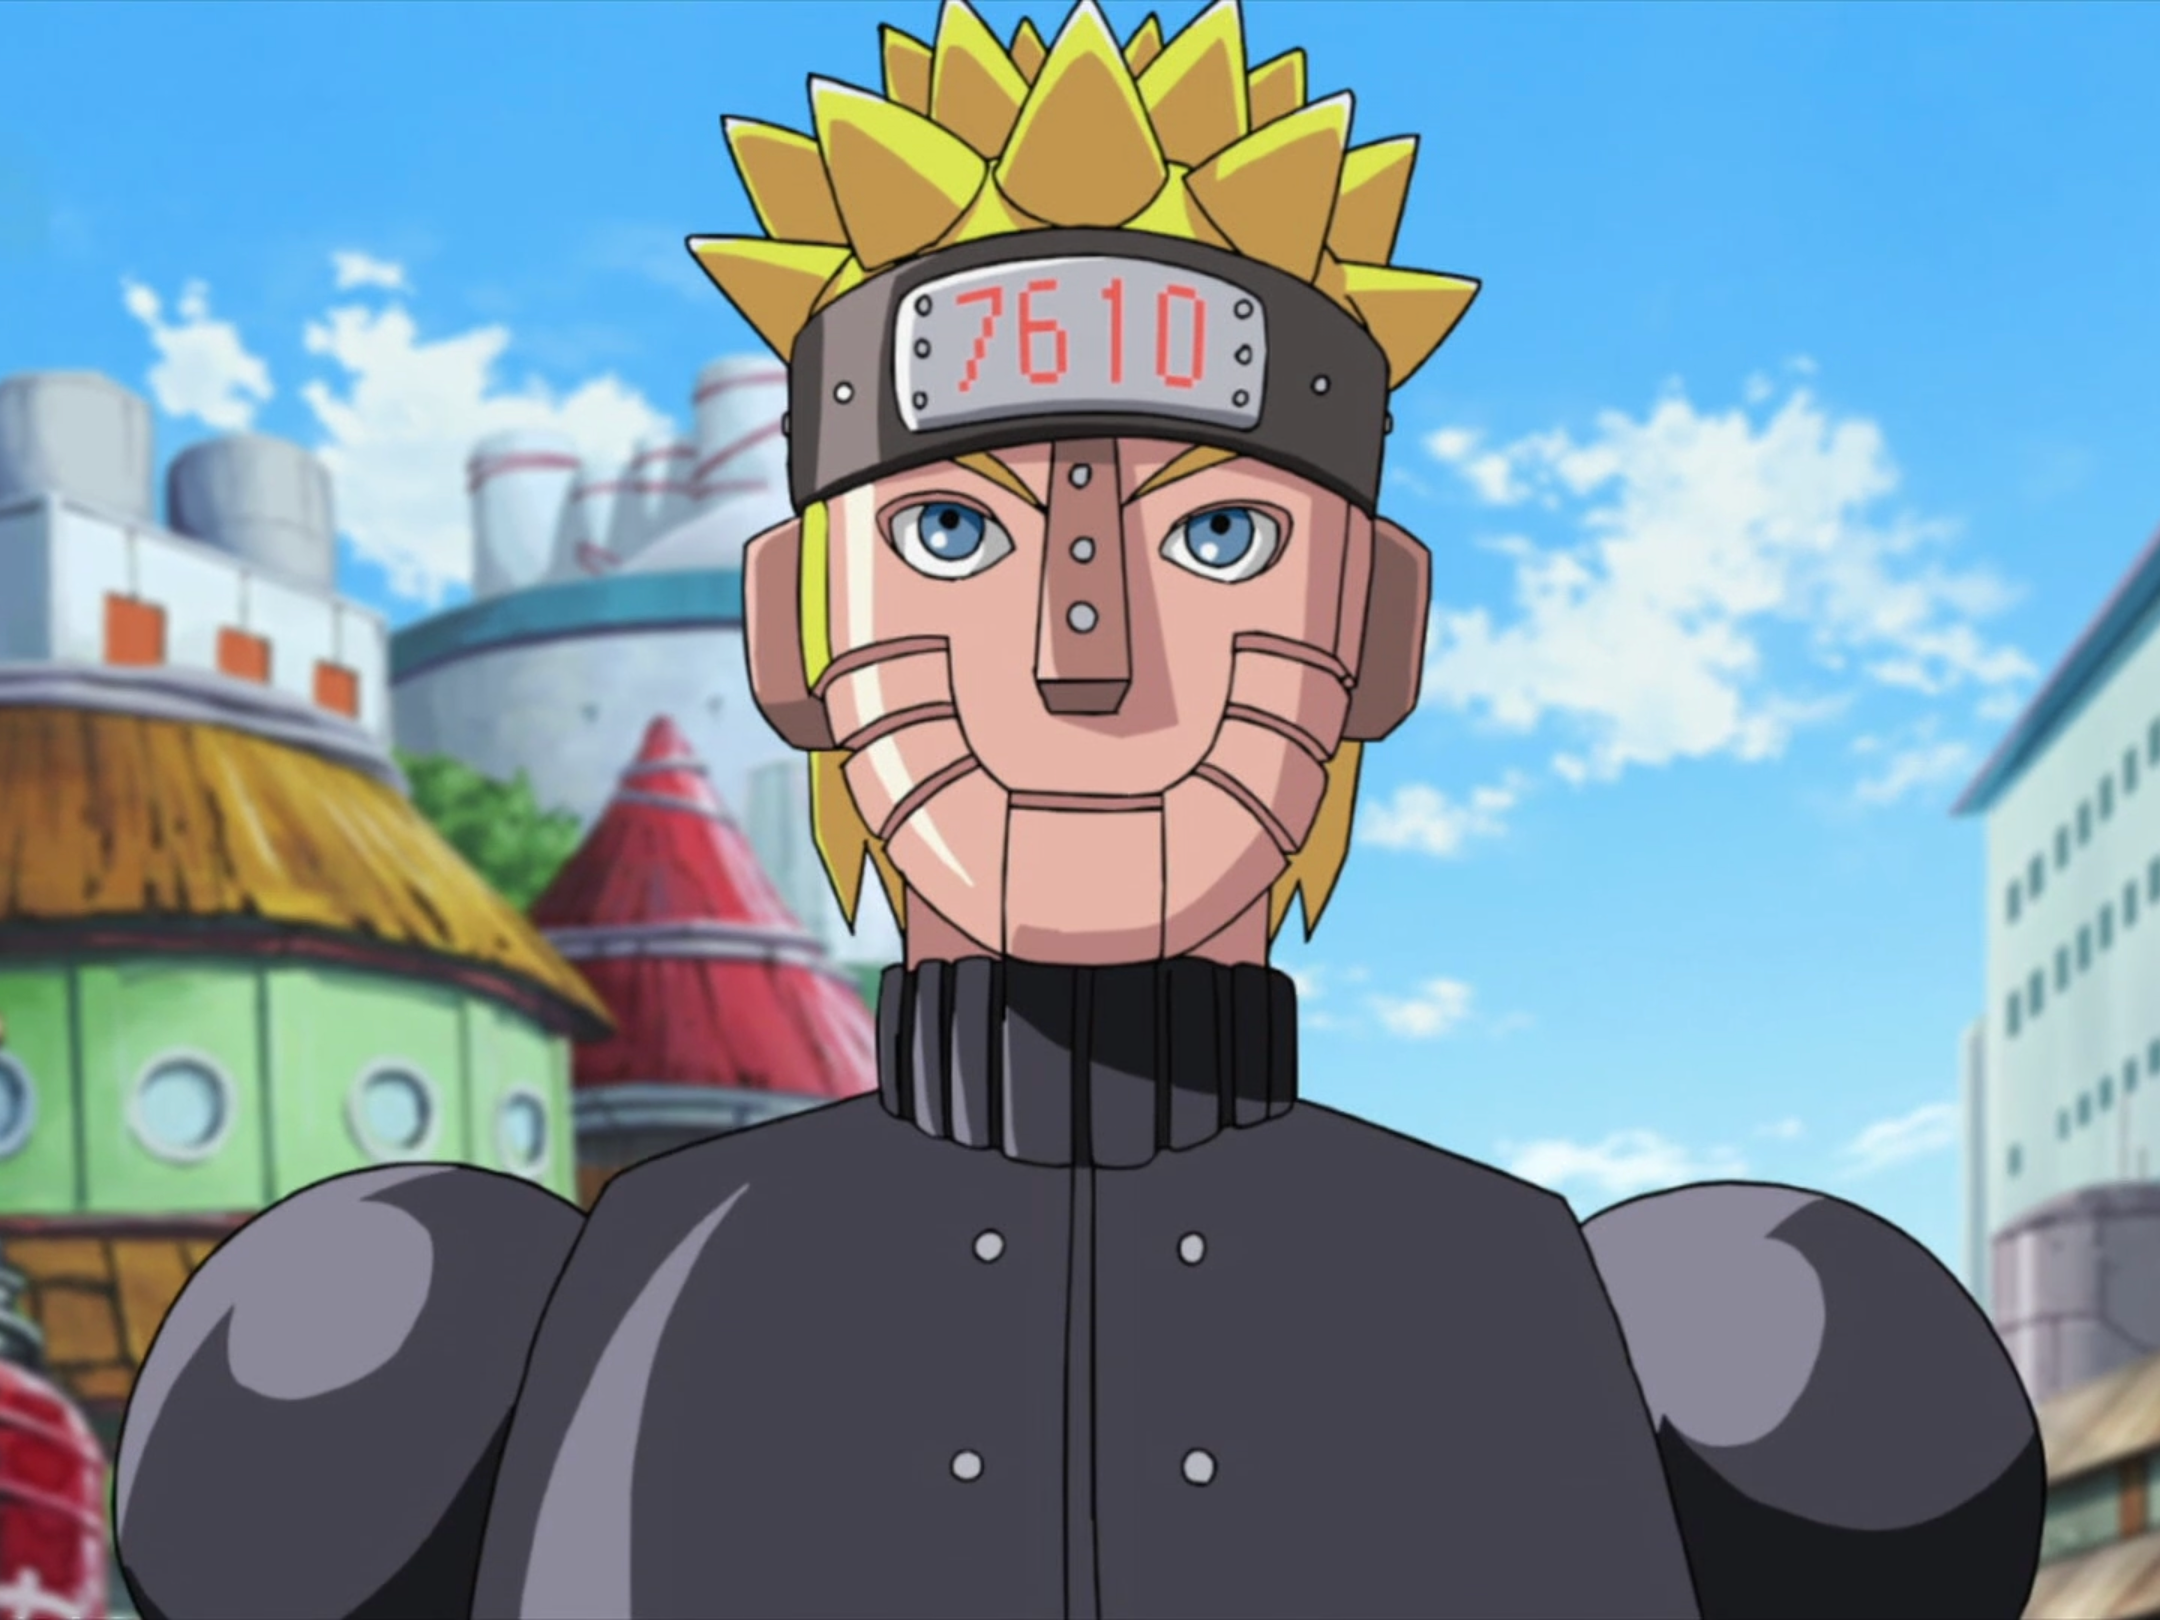 https://static.wikia.nocookie.net/dom-uchiha/images/4/4d/Mecha-Naruto.png/revision/latest?cb=20220224124609&path-prefix=it